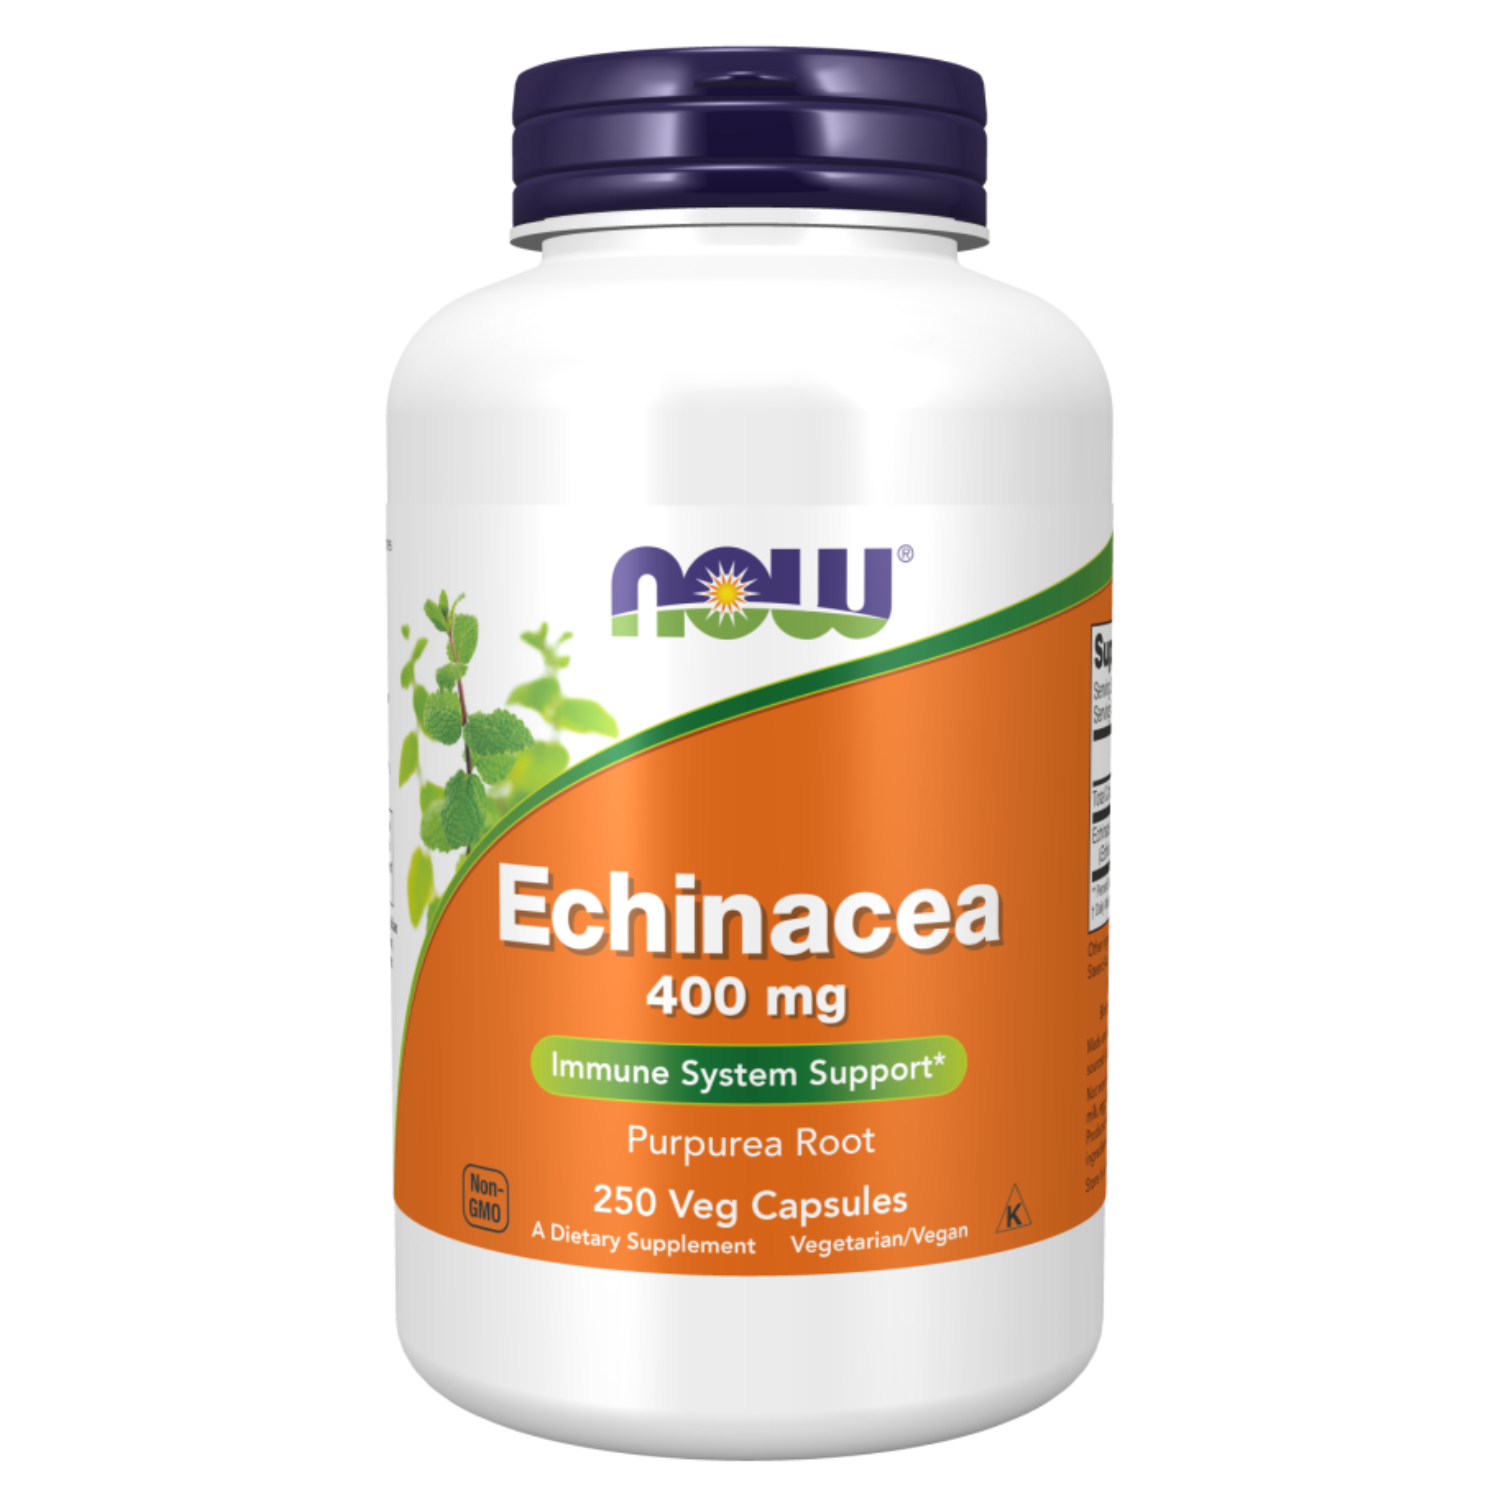 Now Echinacea Immune System Support 500mg Veg Capsules 100's